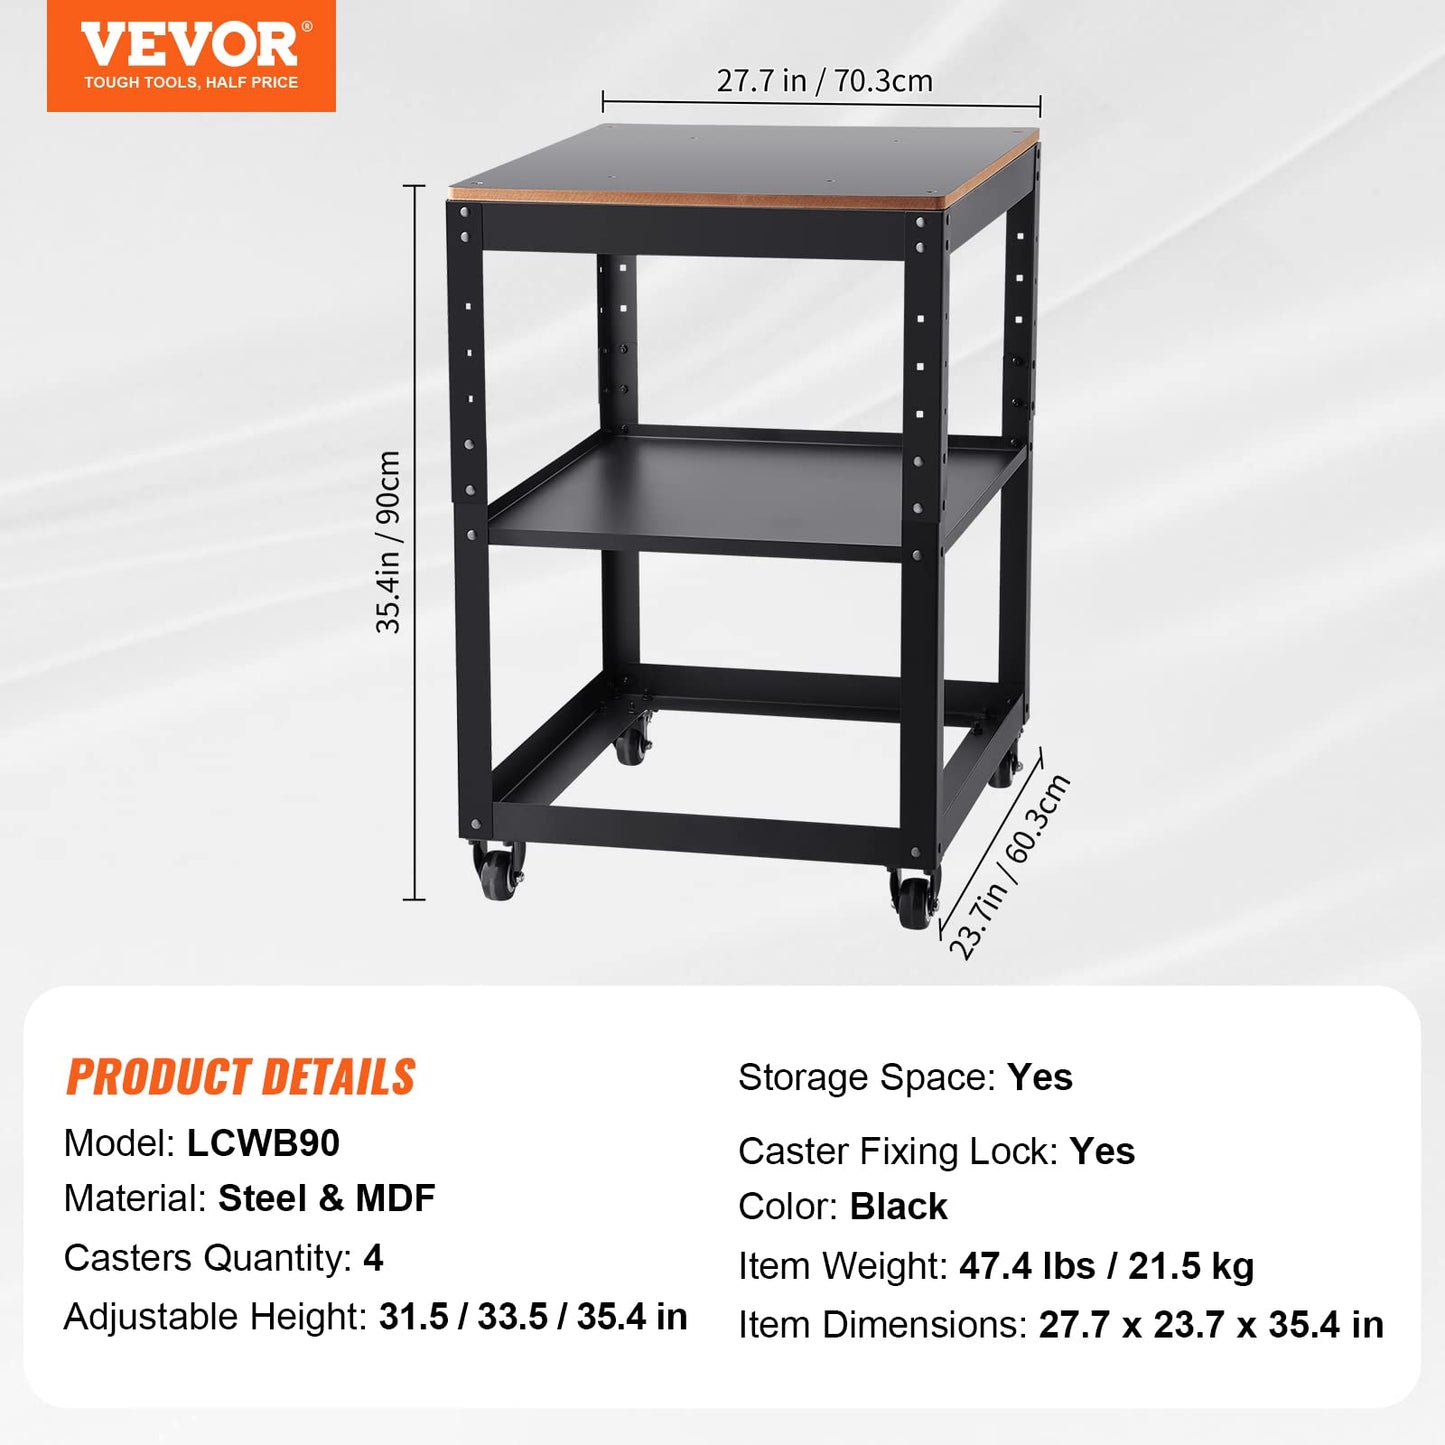 VEVOR Thickness Planer Stand, 100 lbs heavy loads, Three-Gear Height Adjustable Thickness Planer Table,with 4 Stable Casters & Storage Space, for